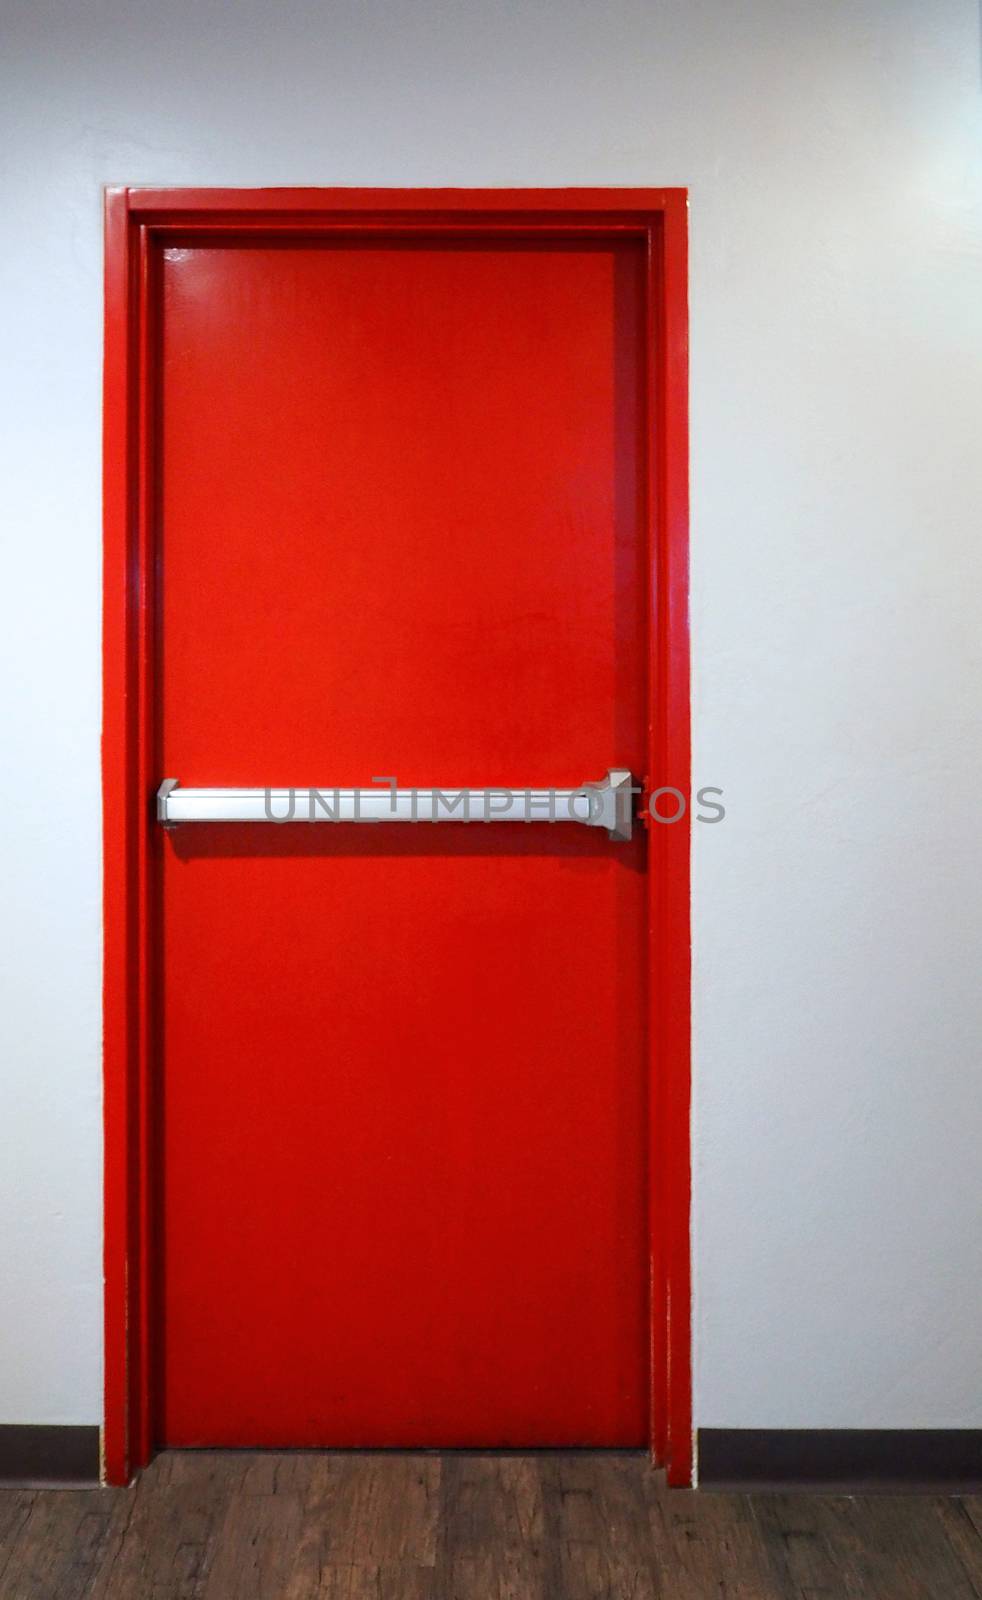 Emergency fire exit door red color. by gnepphoto